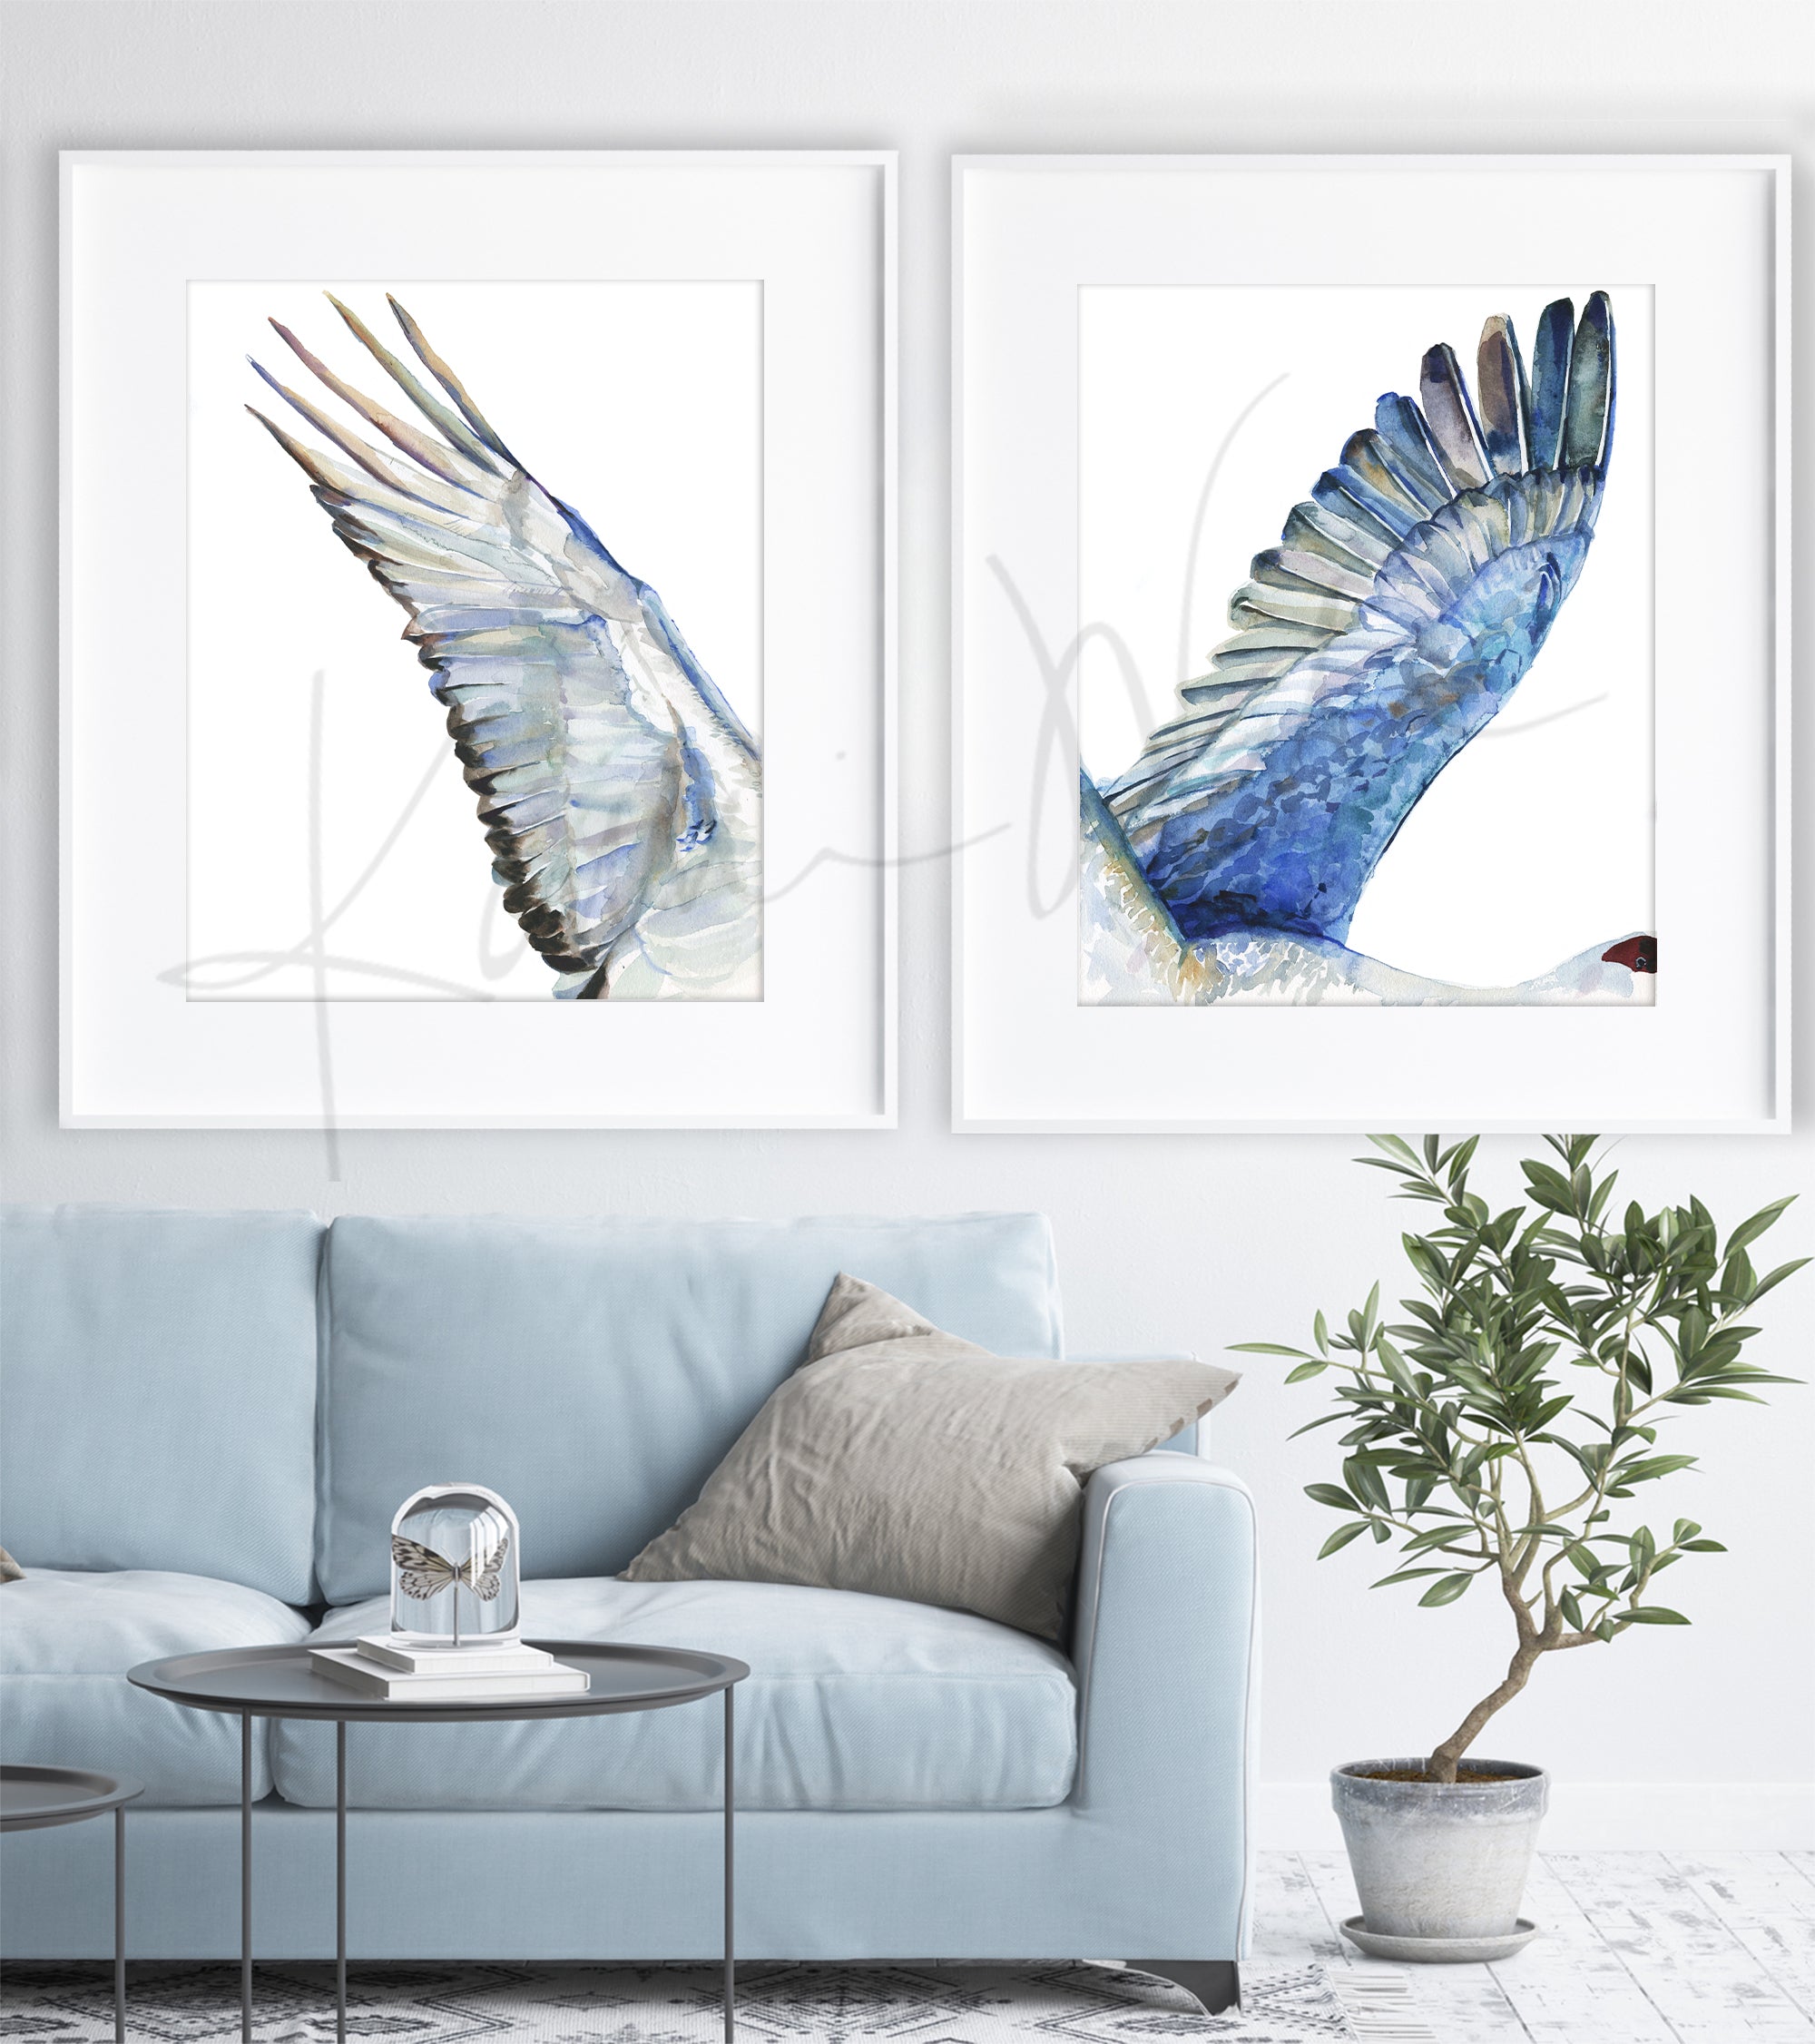 Framed watercolor diptych of a crane's wings. The paintings are hanging over a blue couch.